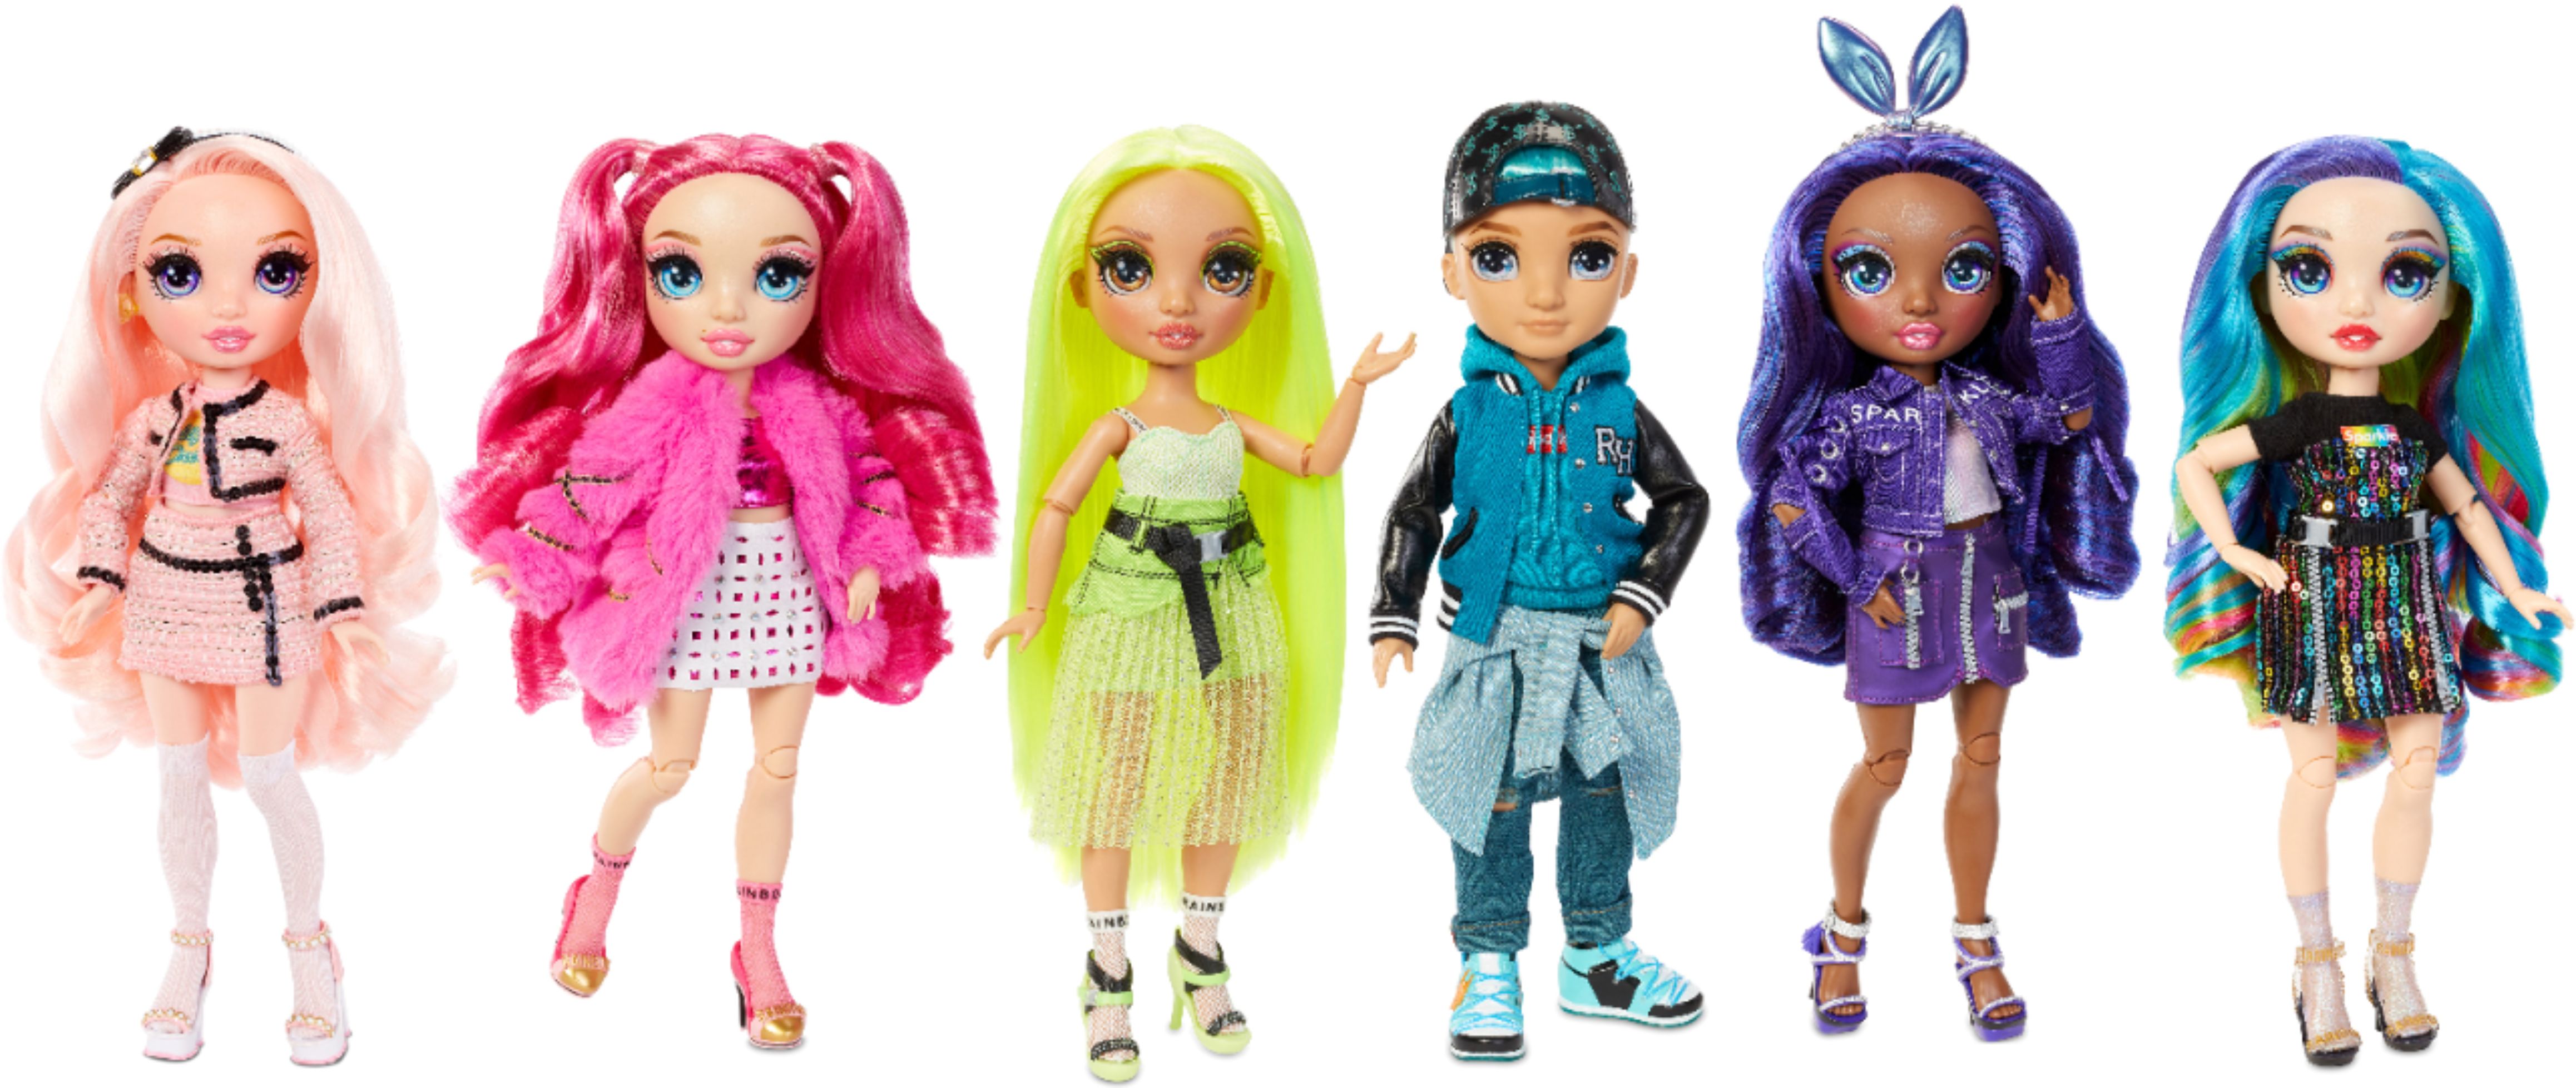 Rainbow High™ Fashion Doll - River Kendall, 1 ct - Fry's Food Stores